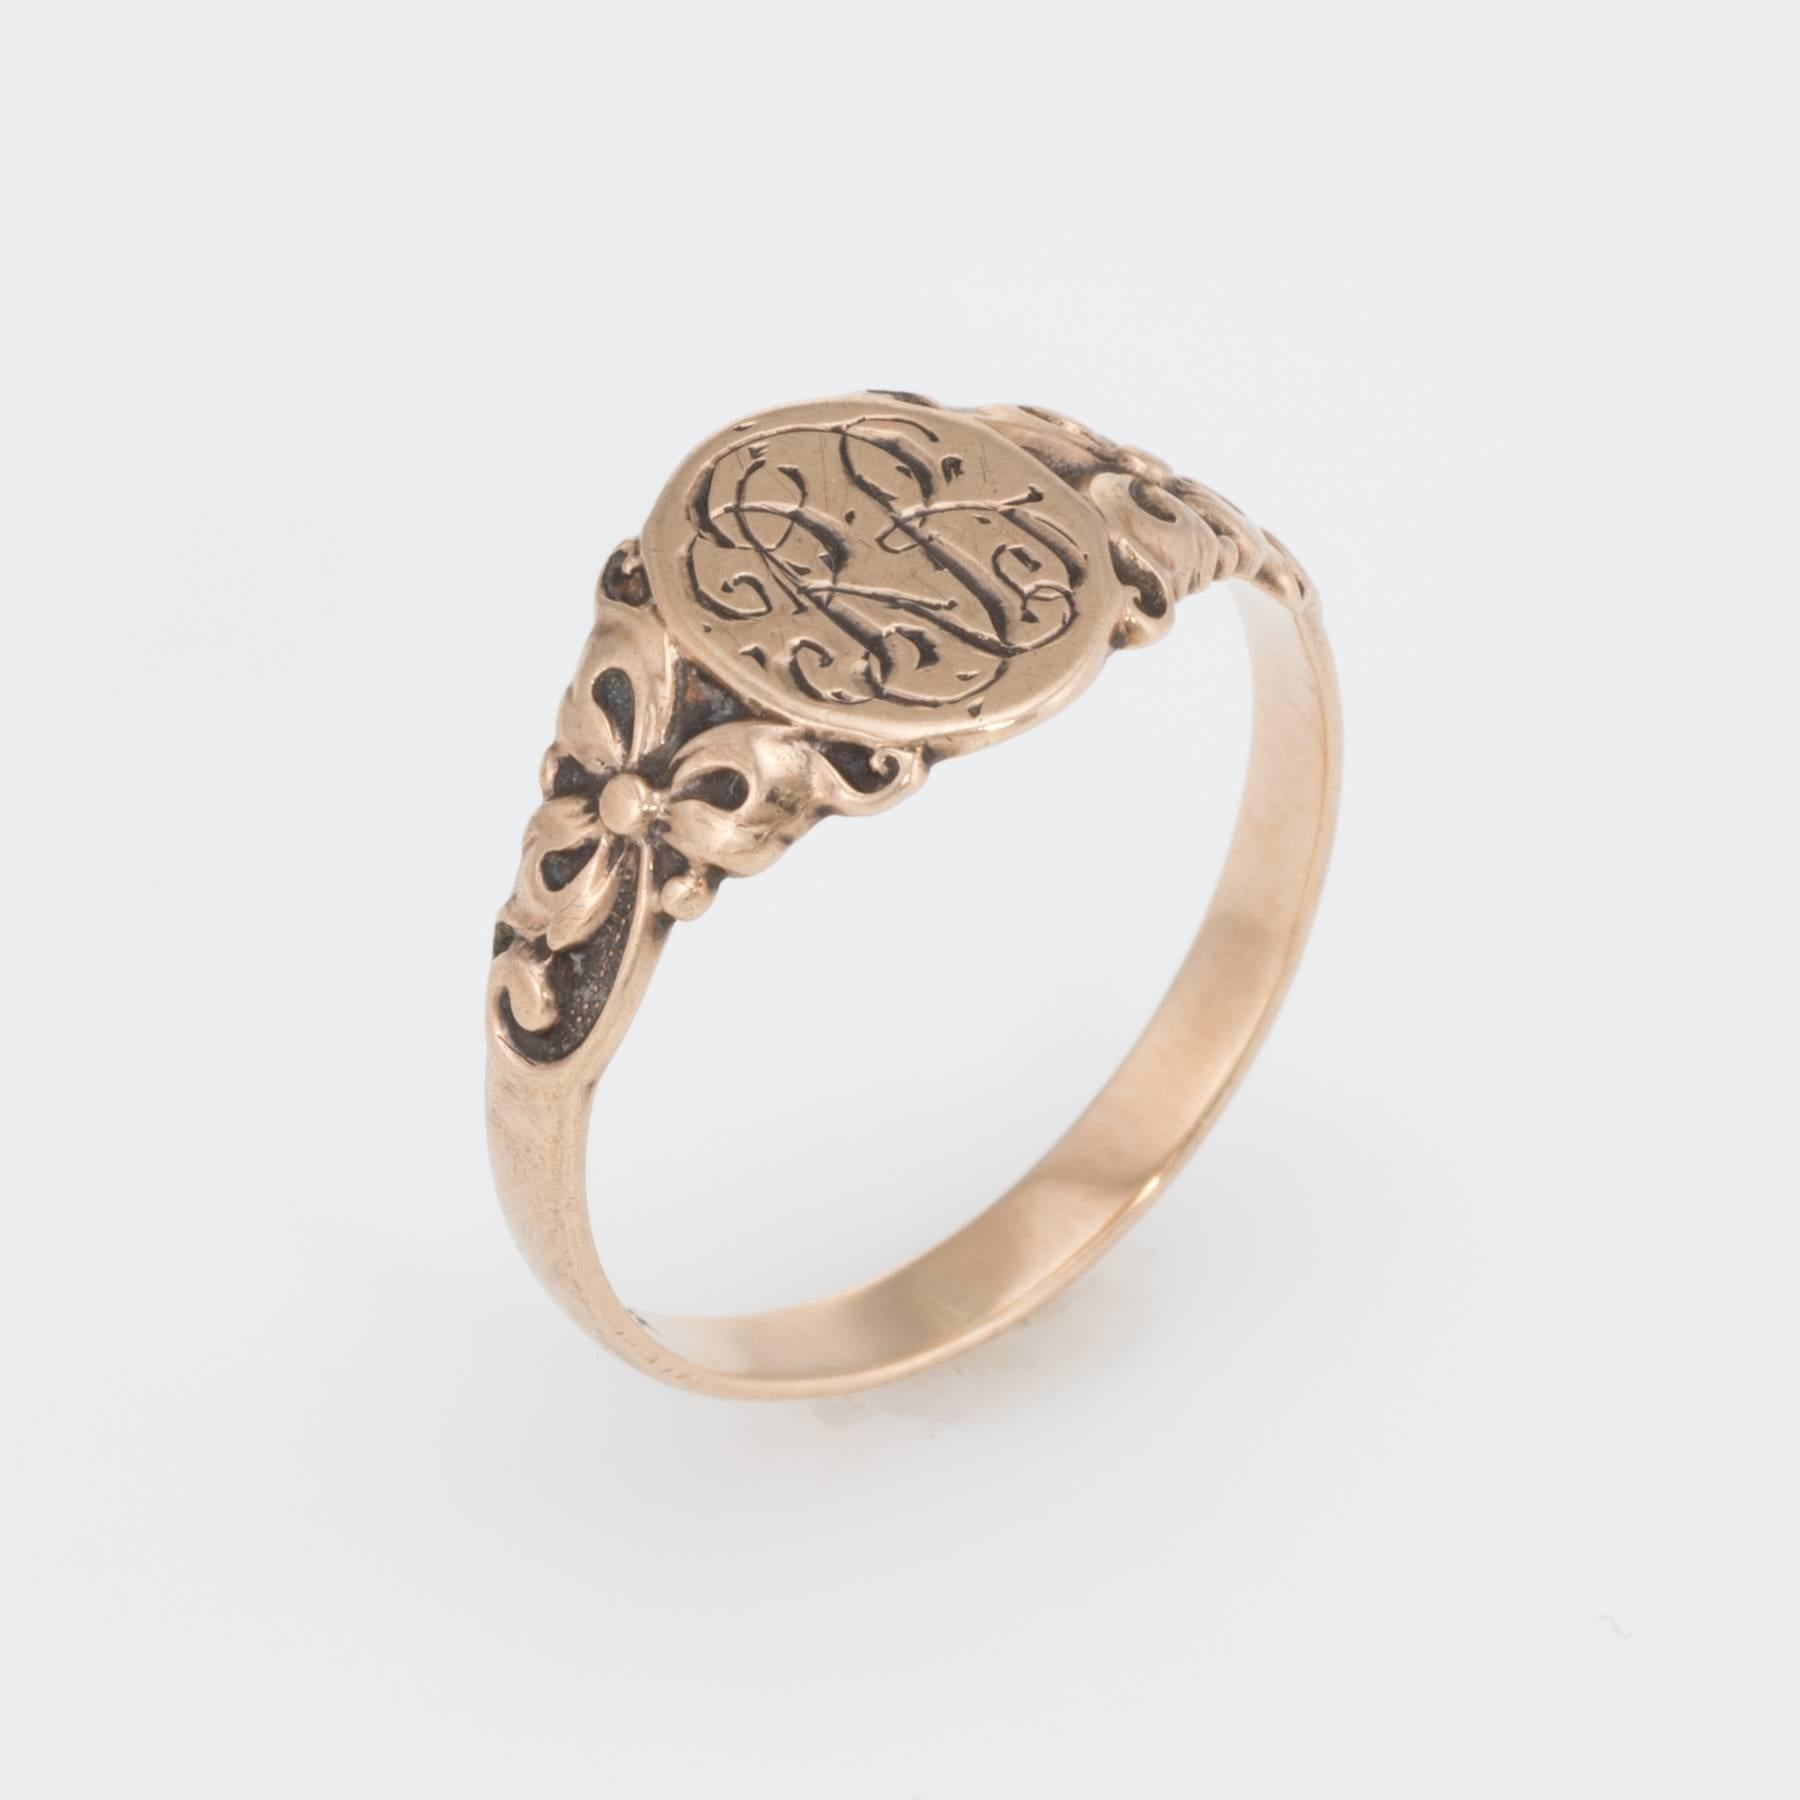 Elegant antique Victorian ring (circa 1880s to 1900s), crafted in 10 karat rose gold. 

The oval signet is inscribed with the letters (from what we can decipher) 